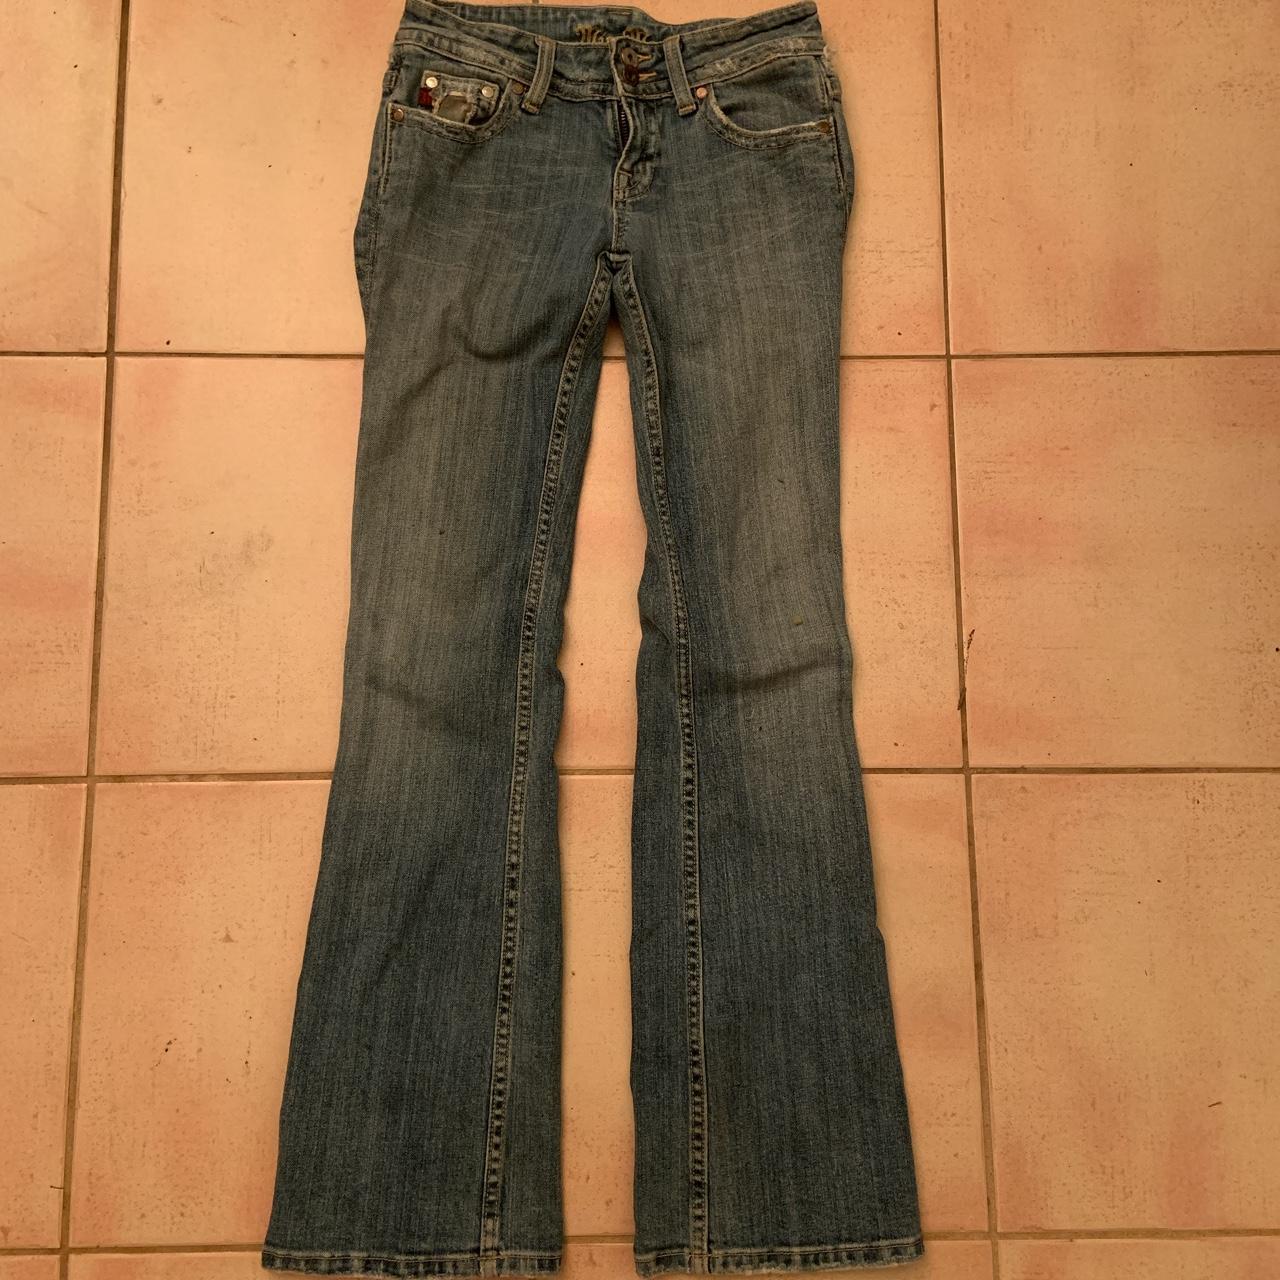 How to Resize Your Jeans : 6 Steps (with Pictures) - Instructables